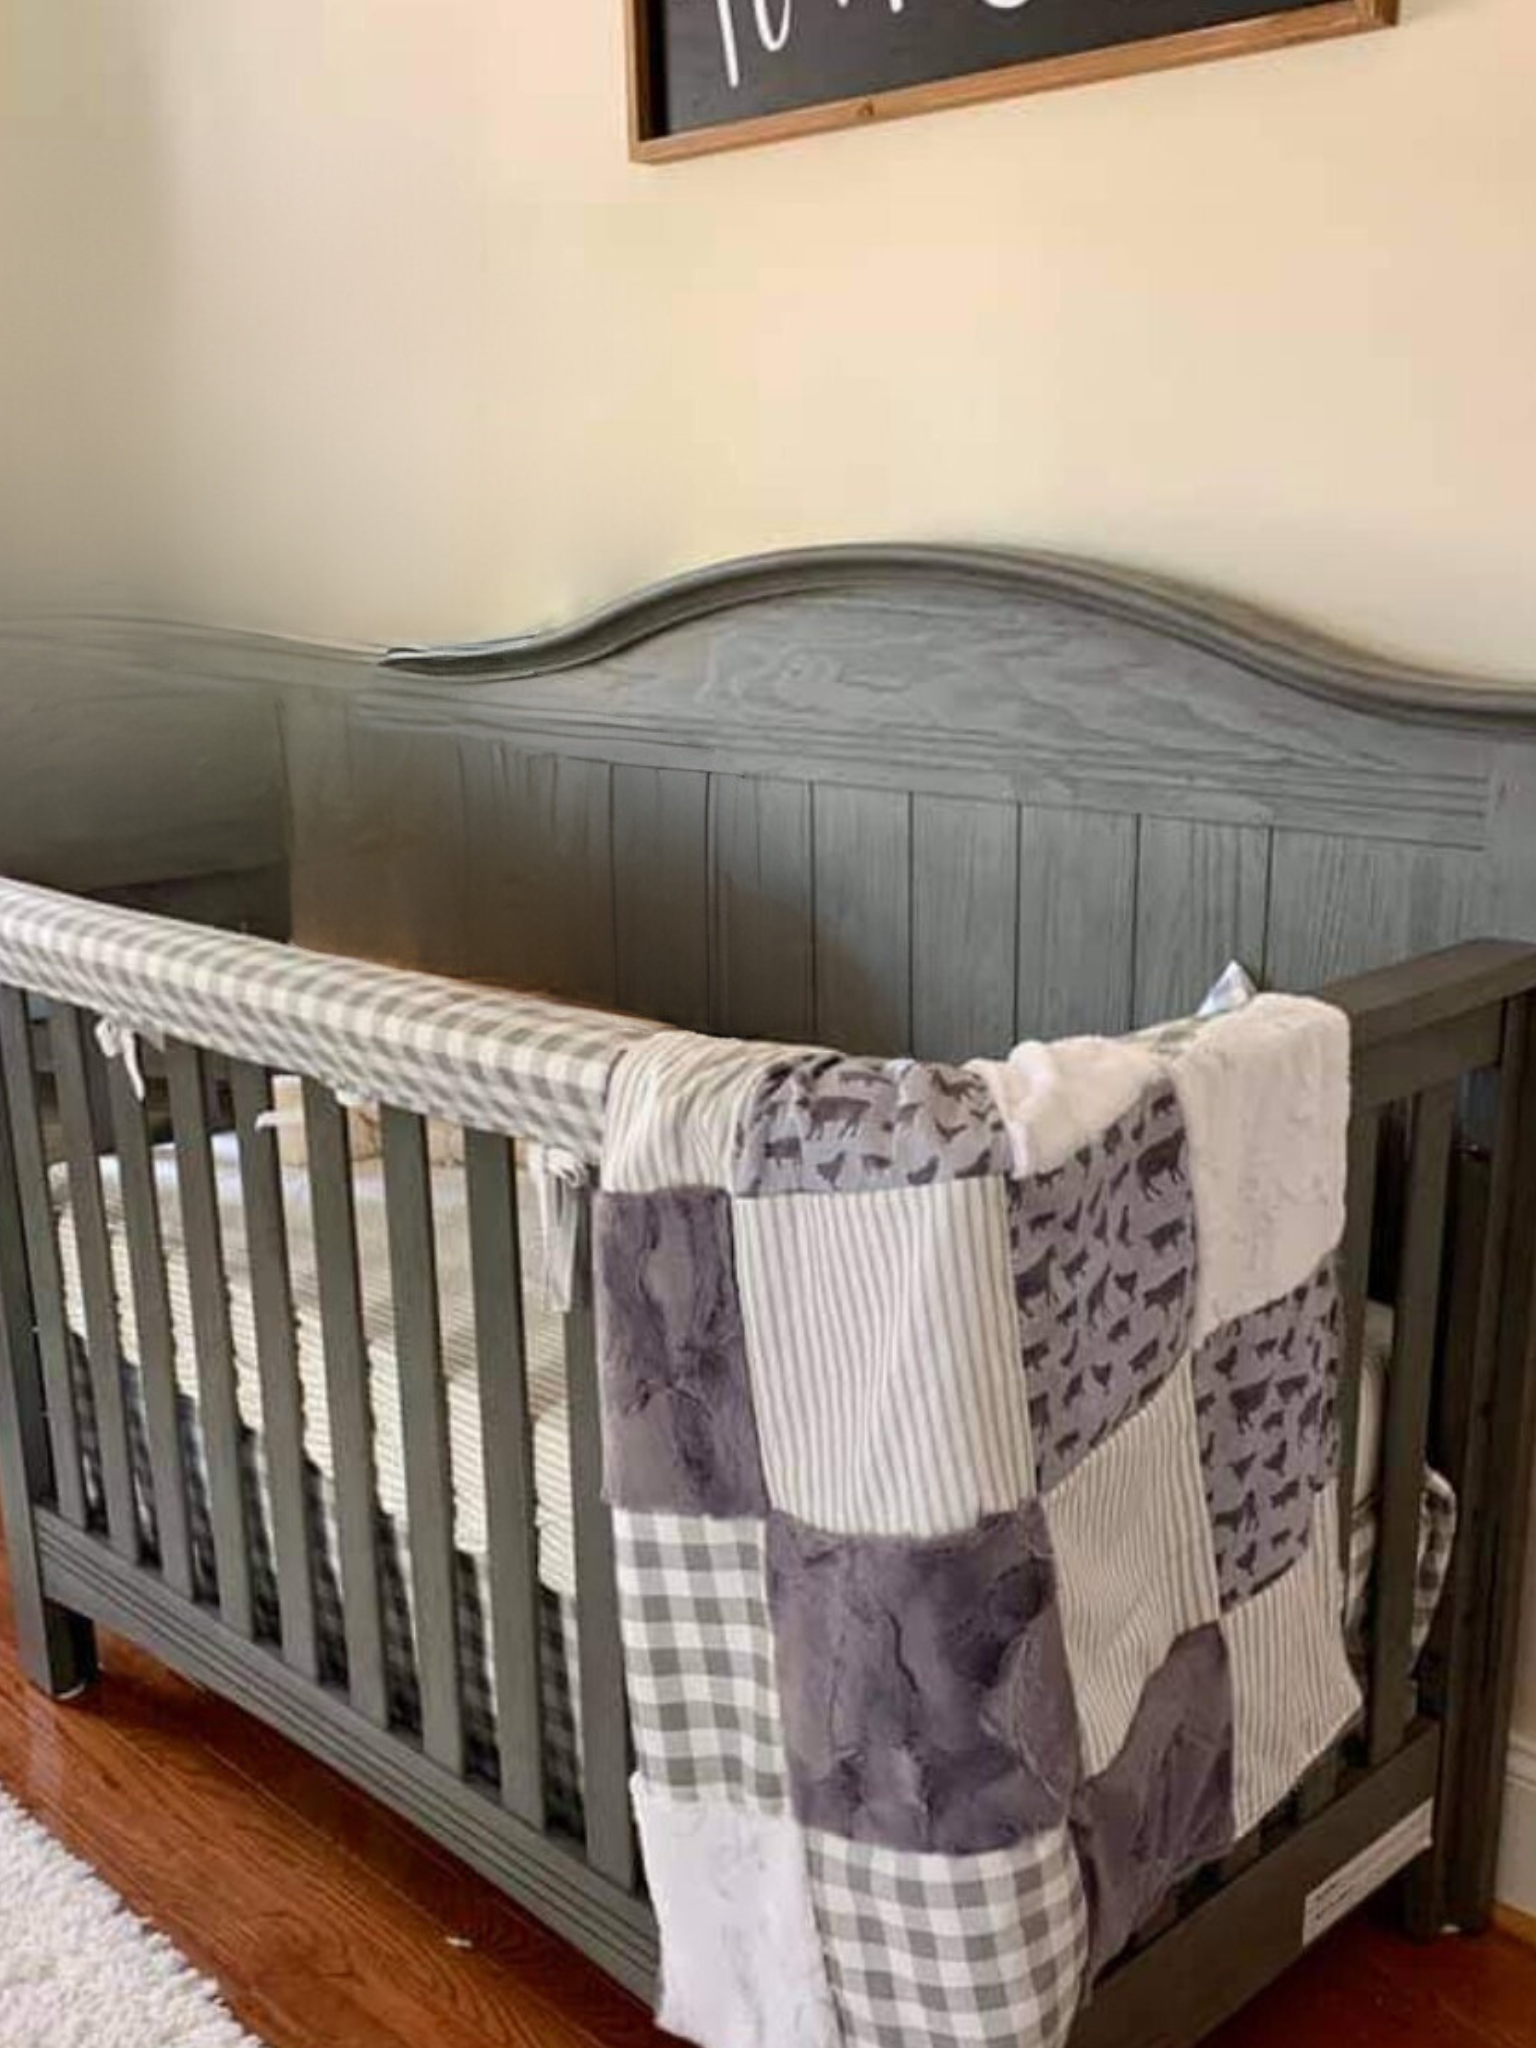 New Release Neutral Crib Bedding - Farm Animal and Gray Plaid Baby Bedding Collection - DBC Baby Bedding Co 